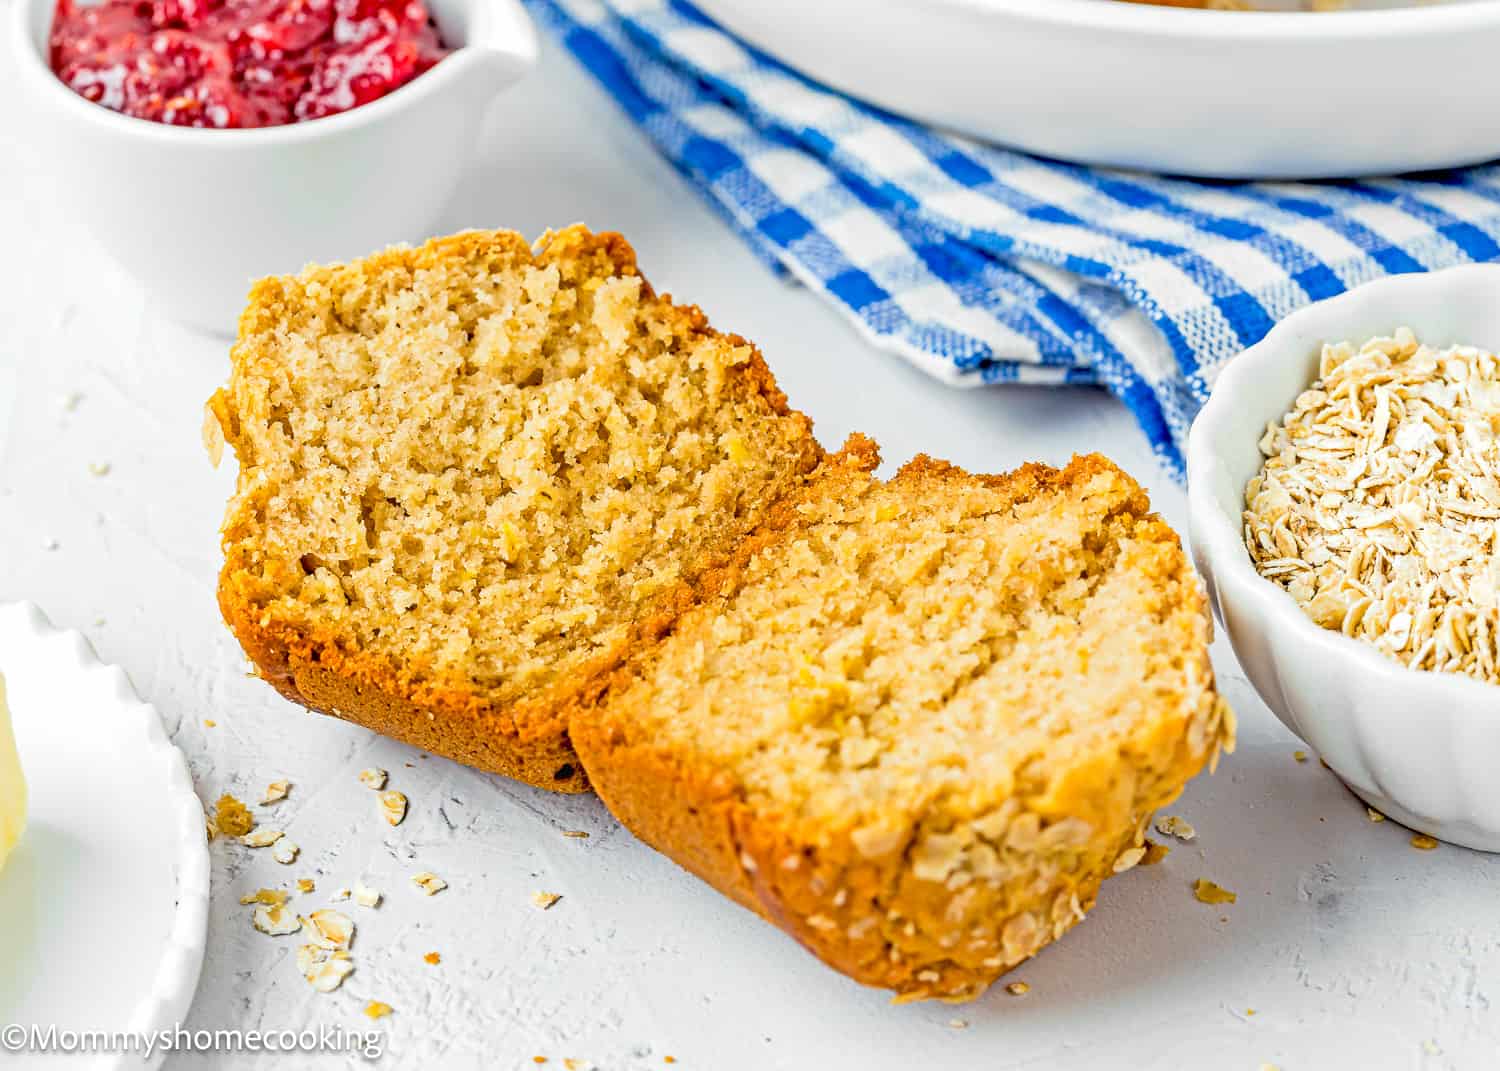 A healthy oat muffin cut in half is sitting on a table next to a bowl of oats.